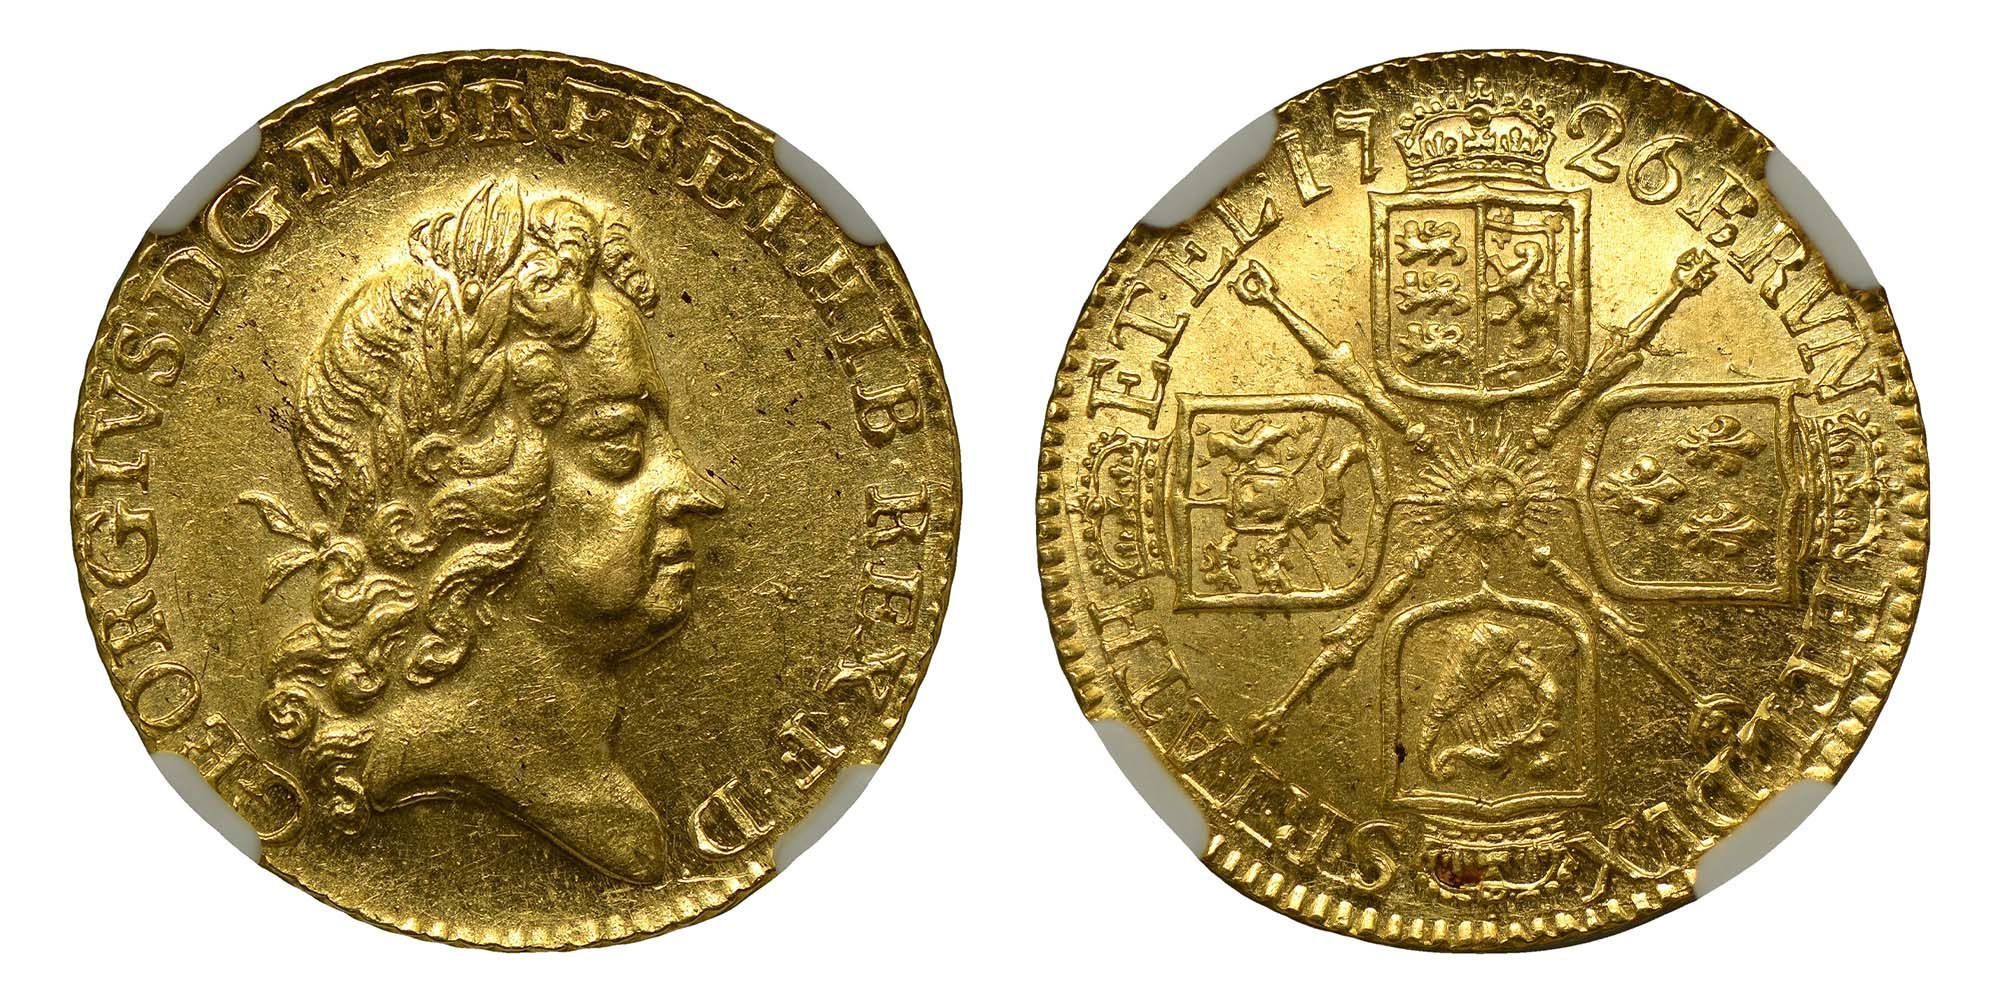 George I Gold Guinea 1726 Scarce in this grade